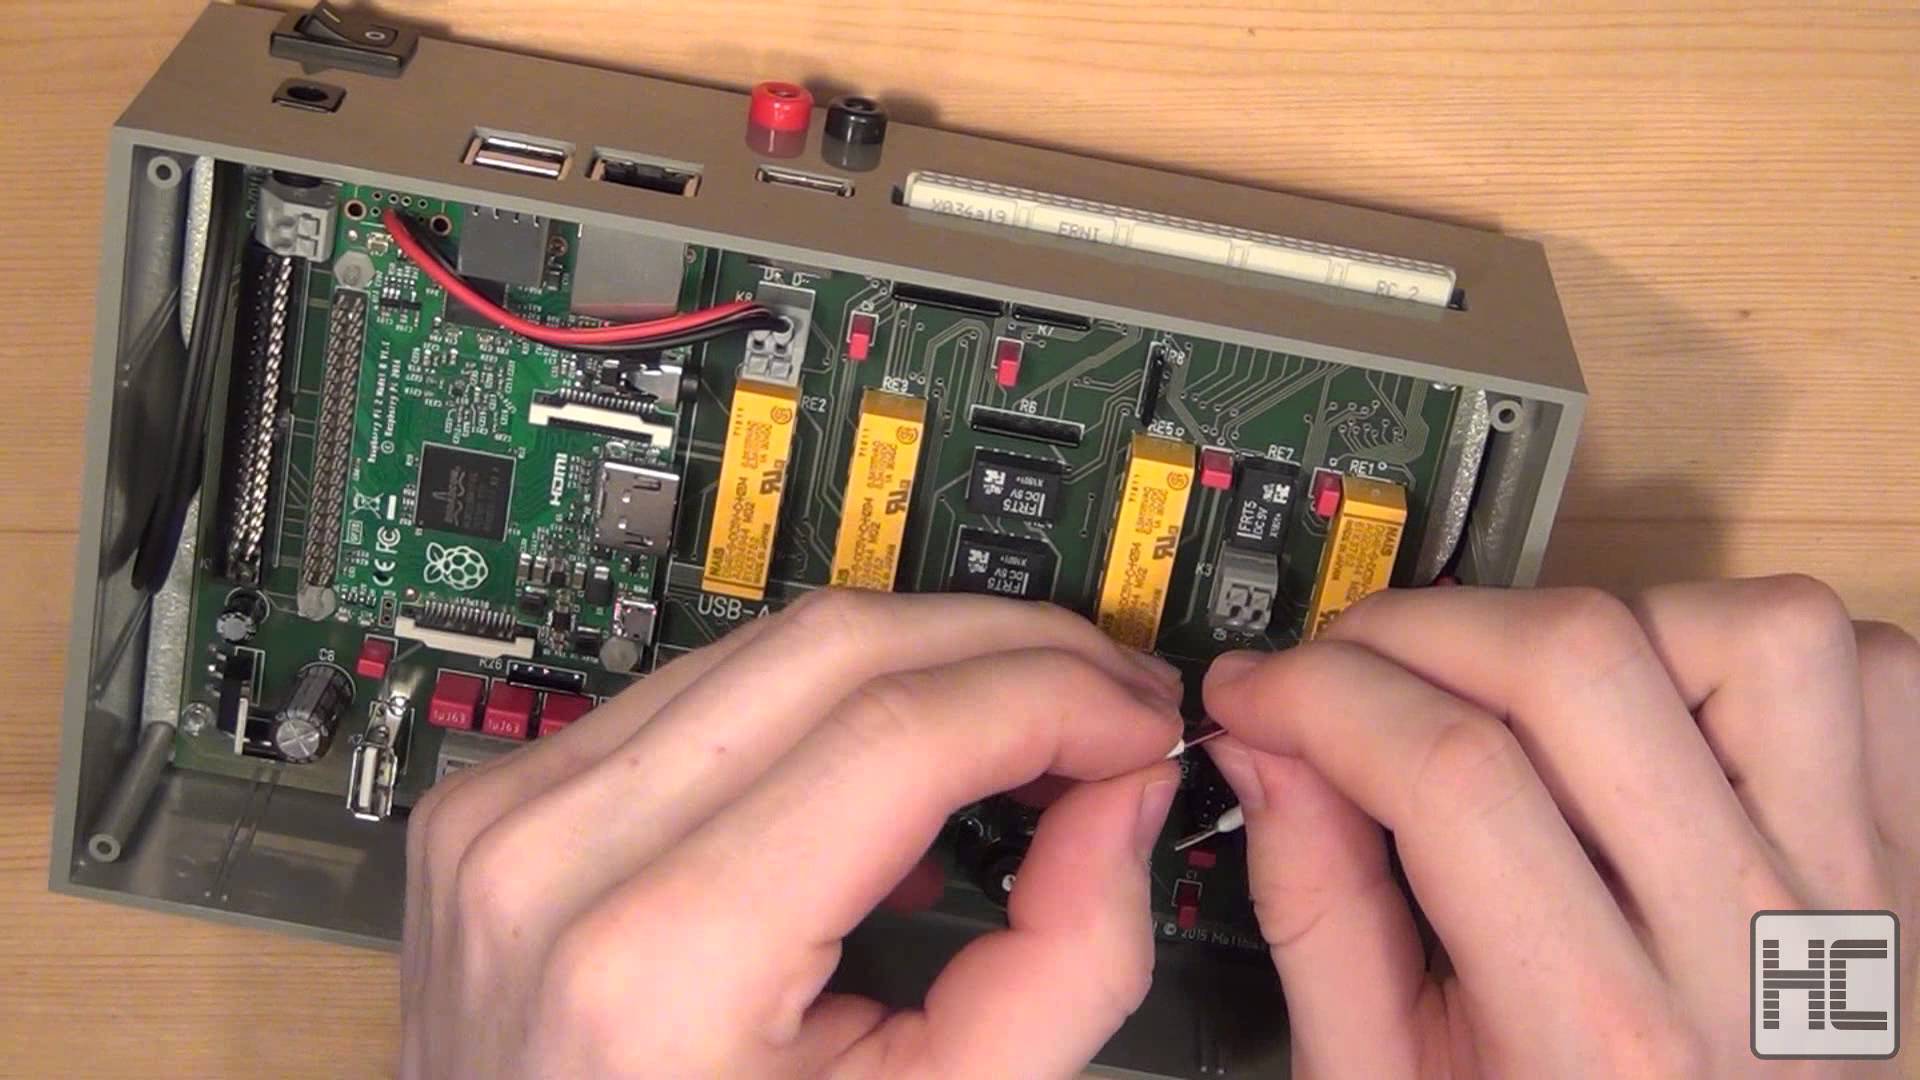 Video: Microcontroller board tester - Assembly of the device